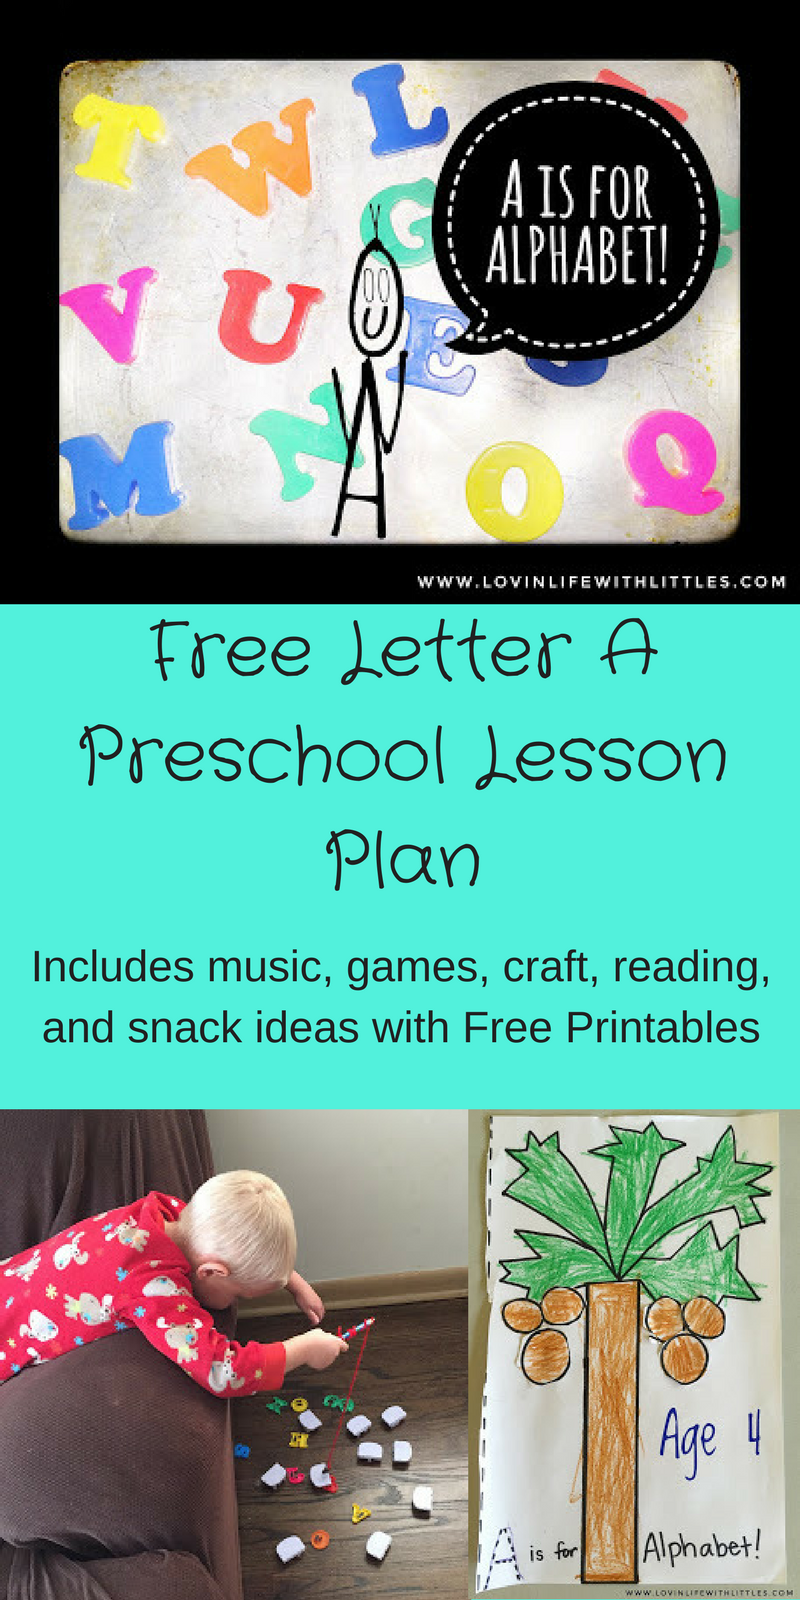 a-is-for-alphabet-letter-a-preschool-activities-and-lesson-plan